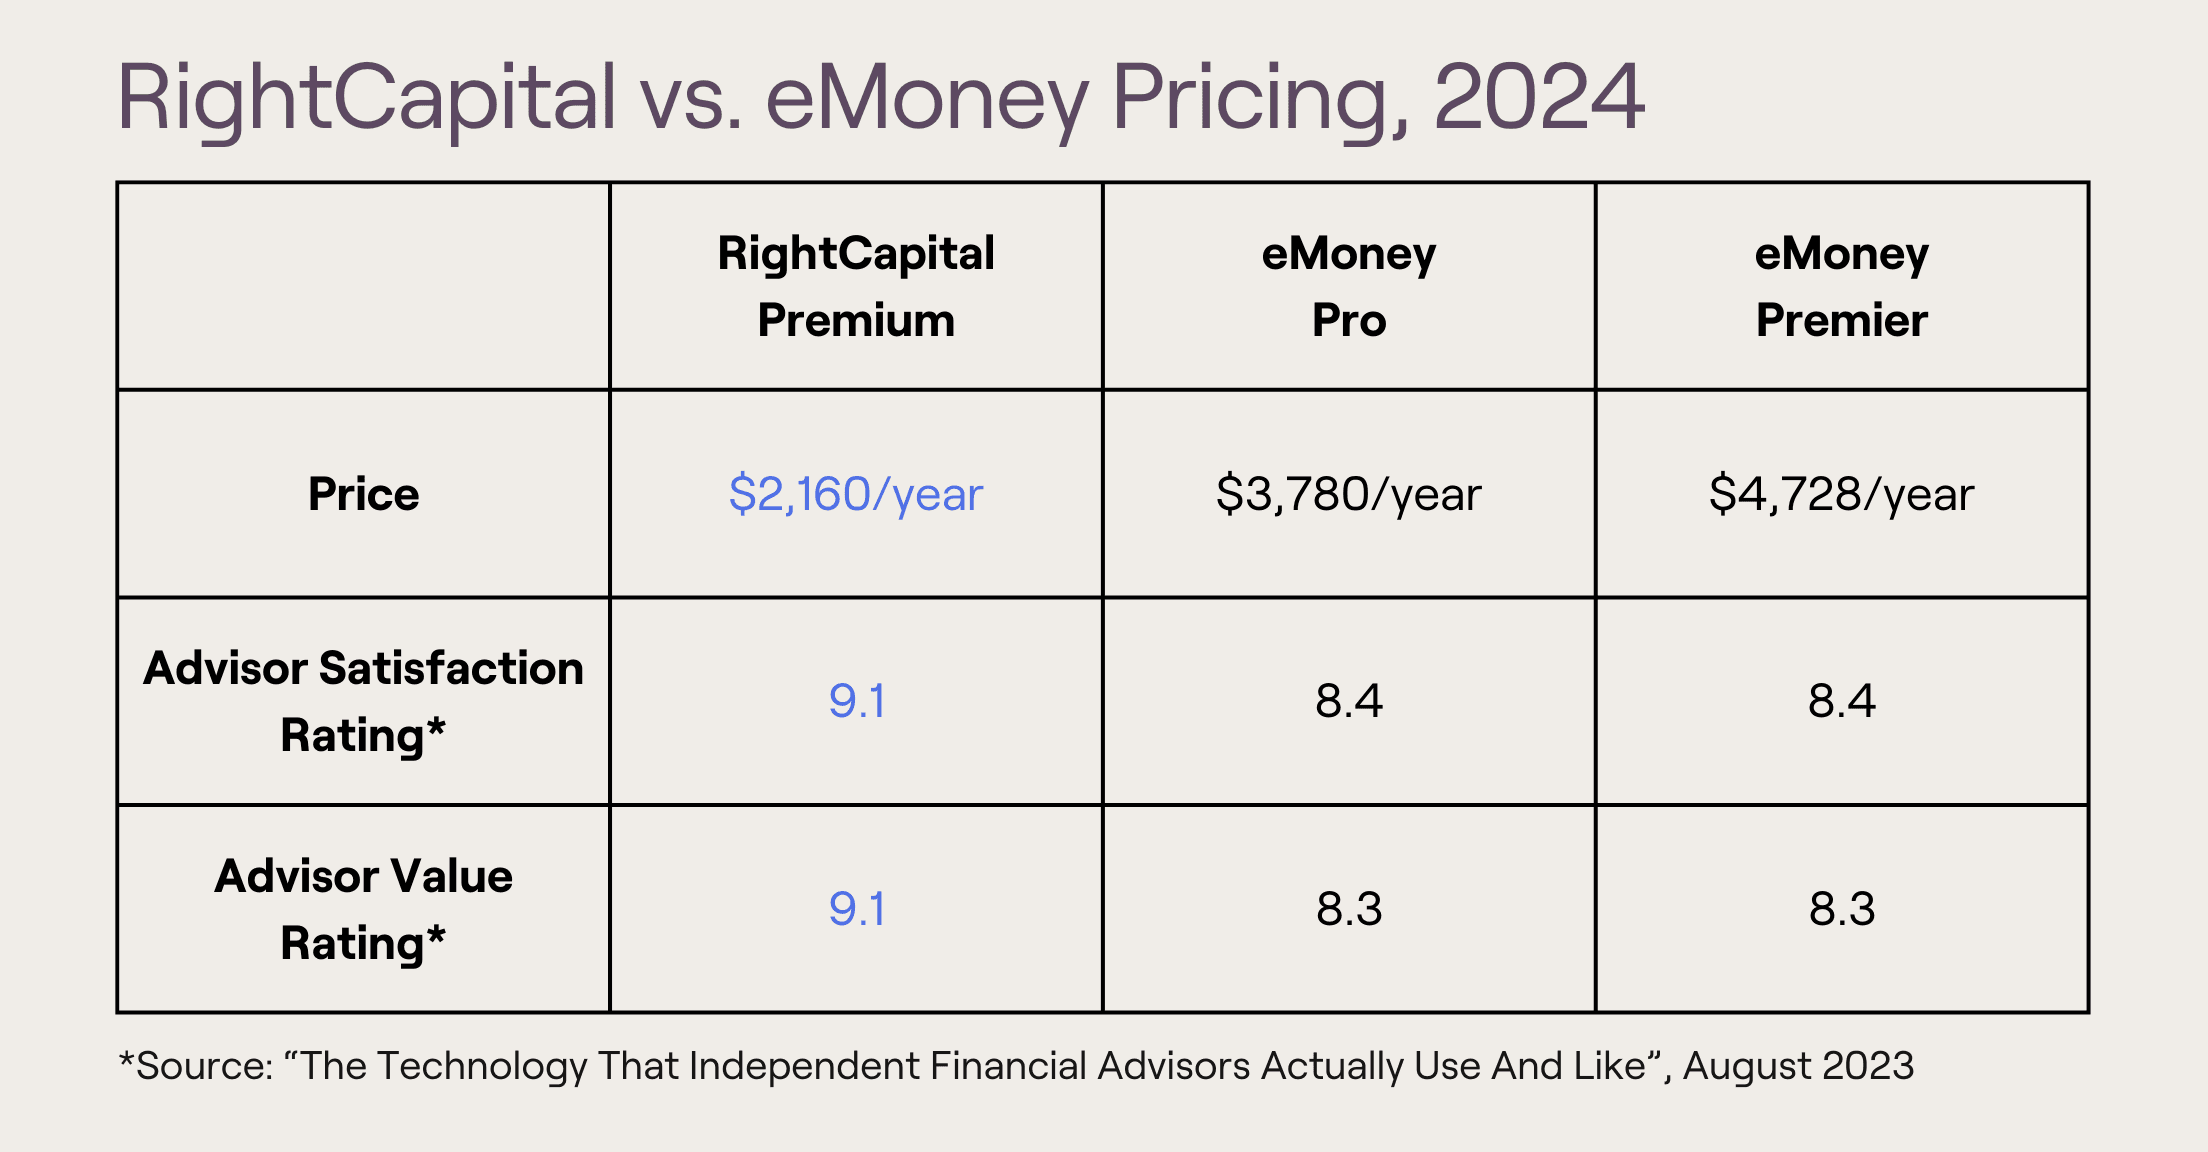 A chart showing the yearly cost of RightCapital Premium ($2160) vs. eMoney Pro ($3780) and eMoney Premier ($4728). Also shown is the 9.1 advisor satisfaction rating and advisor value rating of RightCapital, higher than those of eMoney.